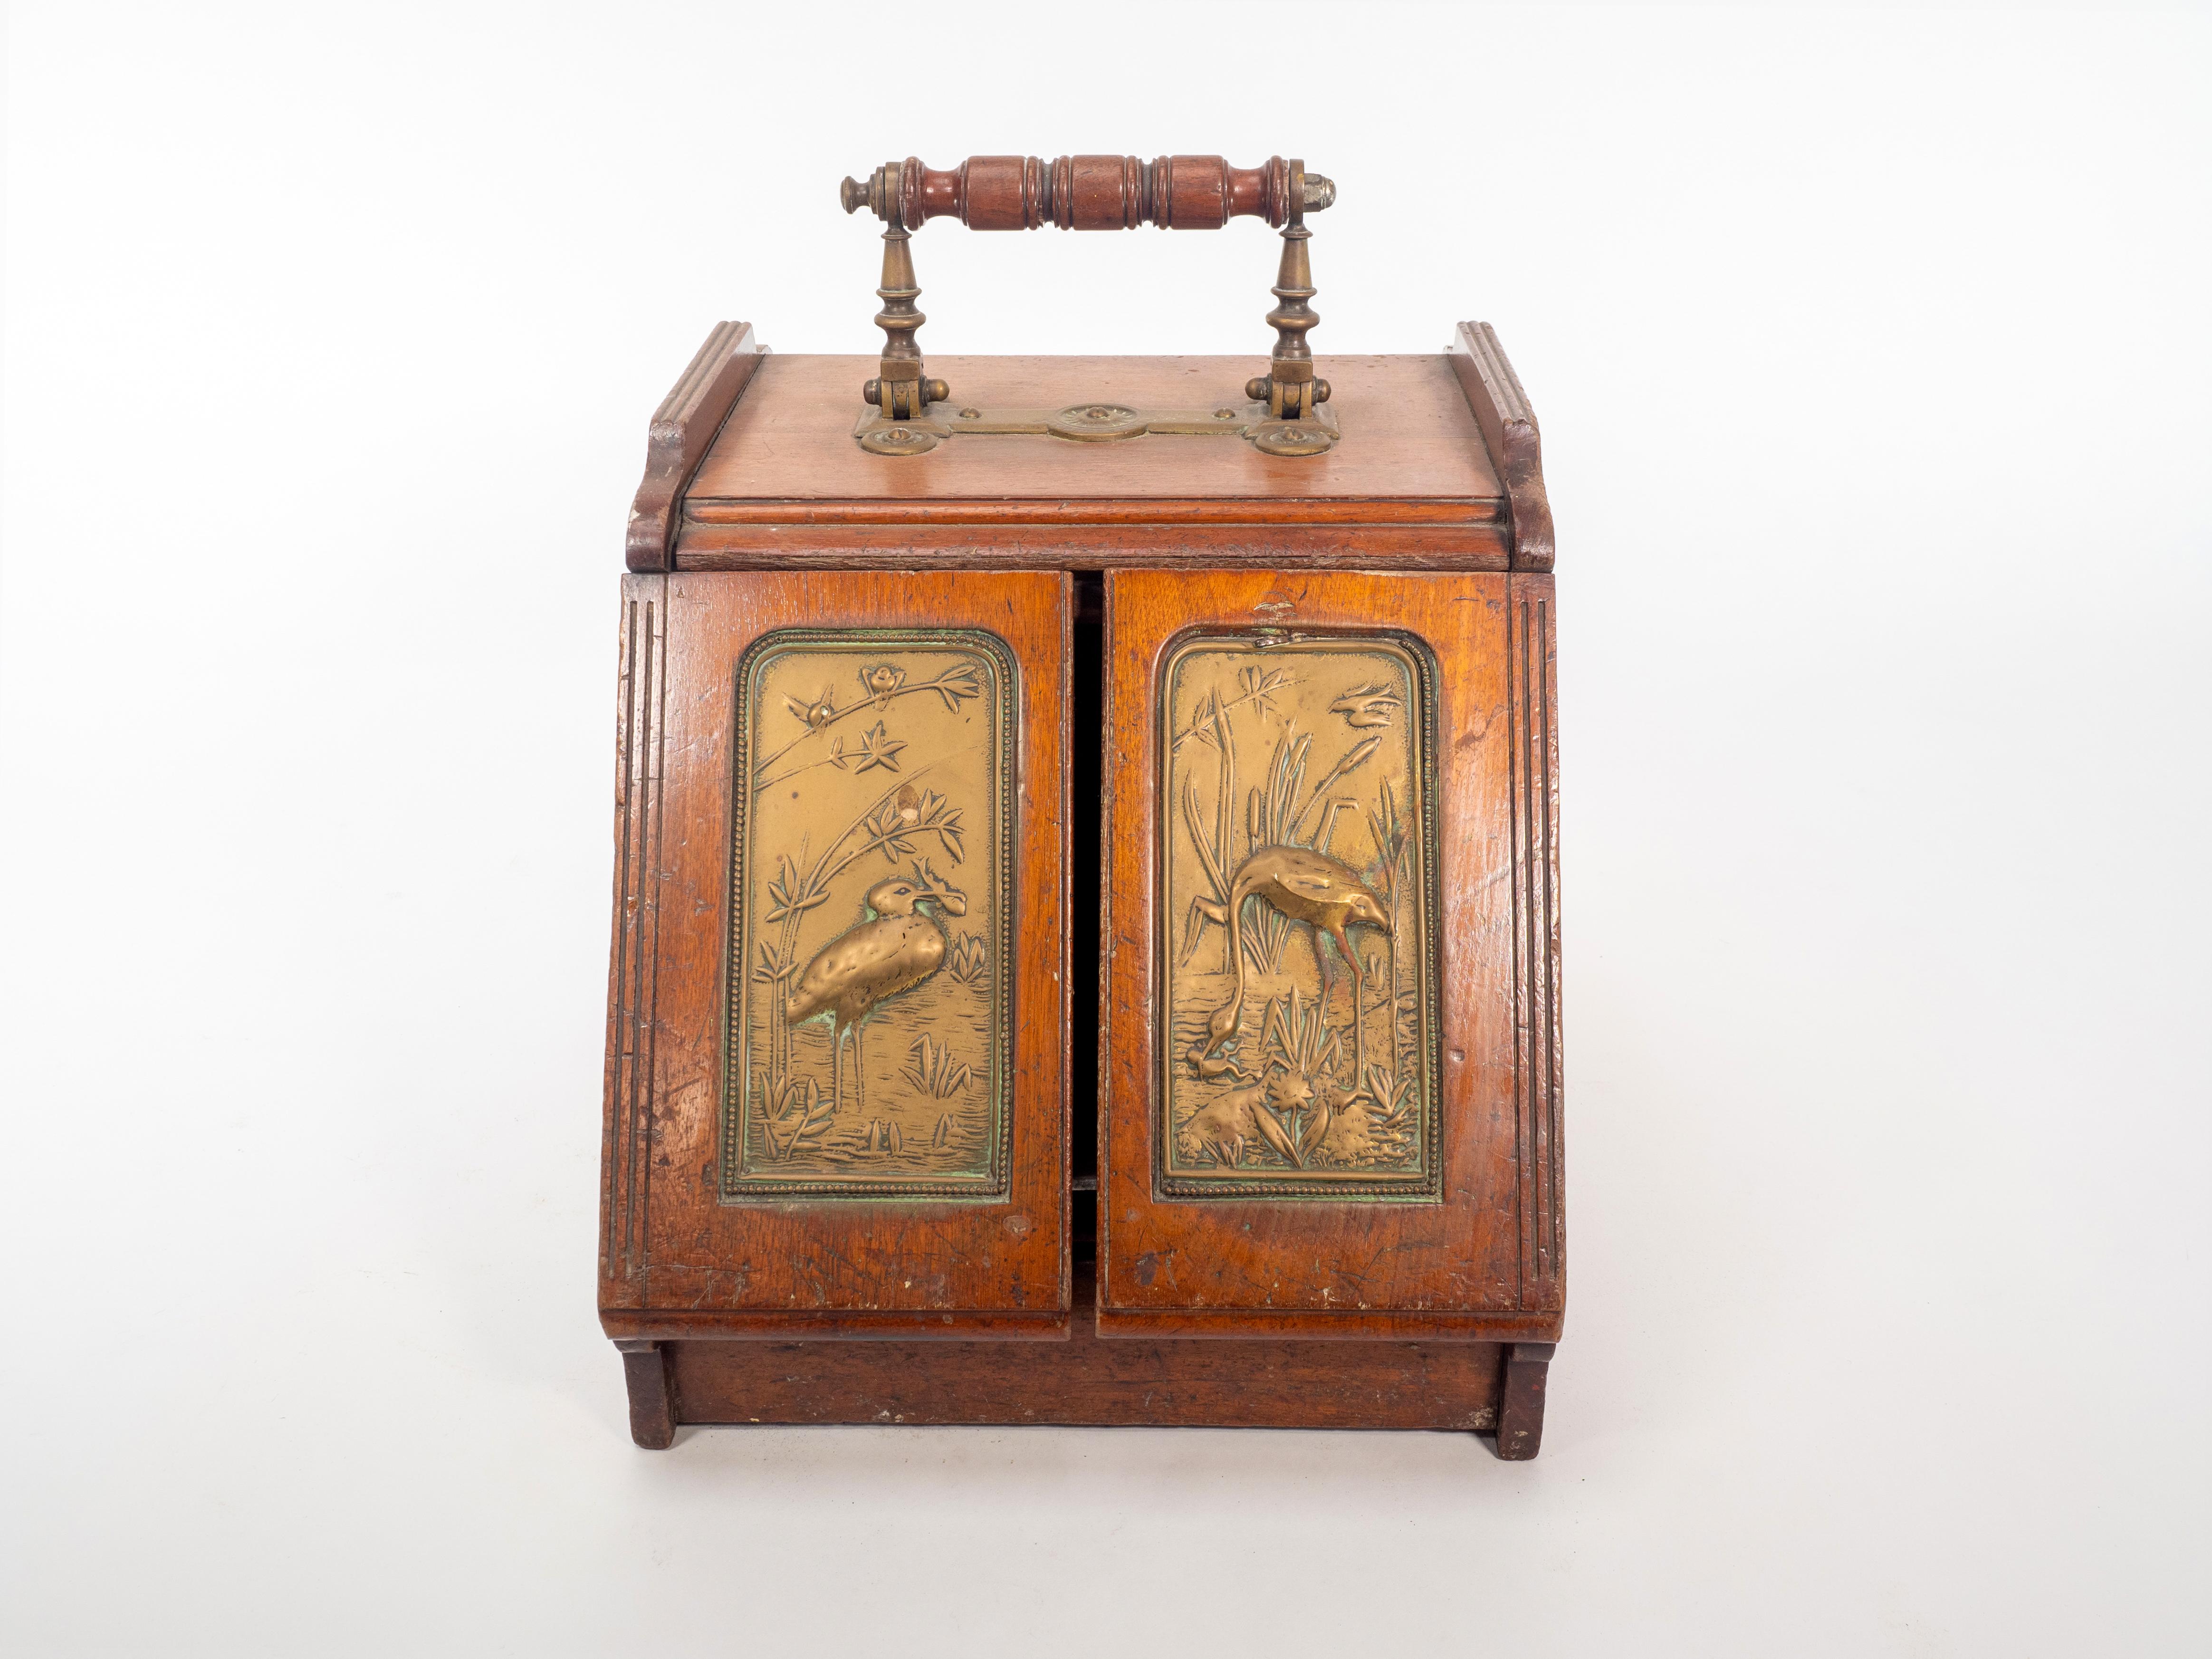 An Aesthetic Movement Walnut metamorphic oak coalbox. The handle when pulled back mechanically opens the two doors to the front, which has brass panels depicting Herons eating fish in a river scene with bullrushes and birds above them. The original